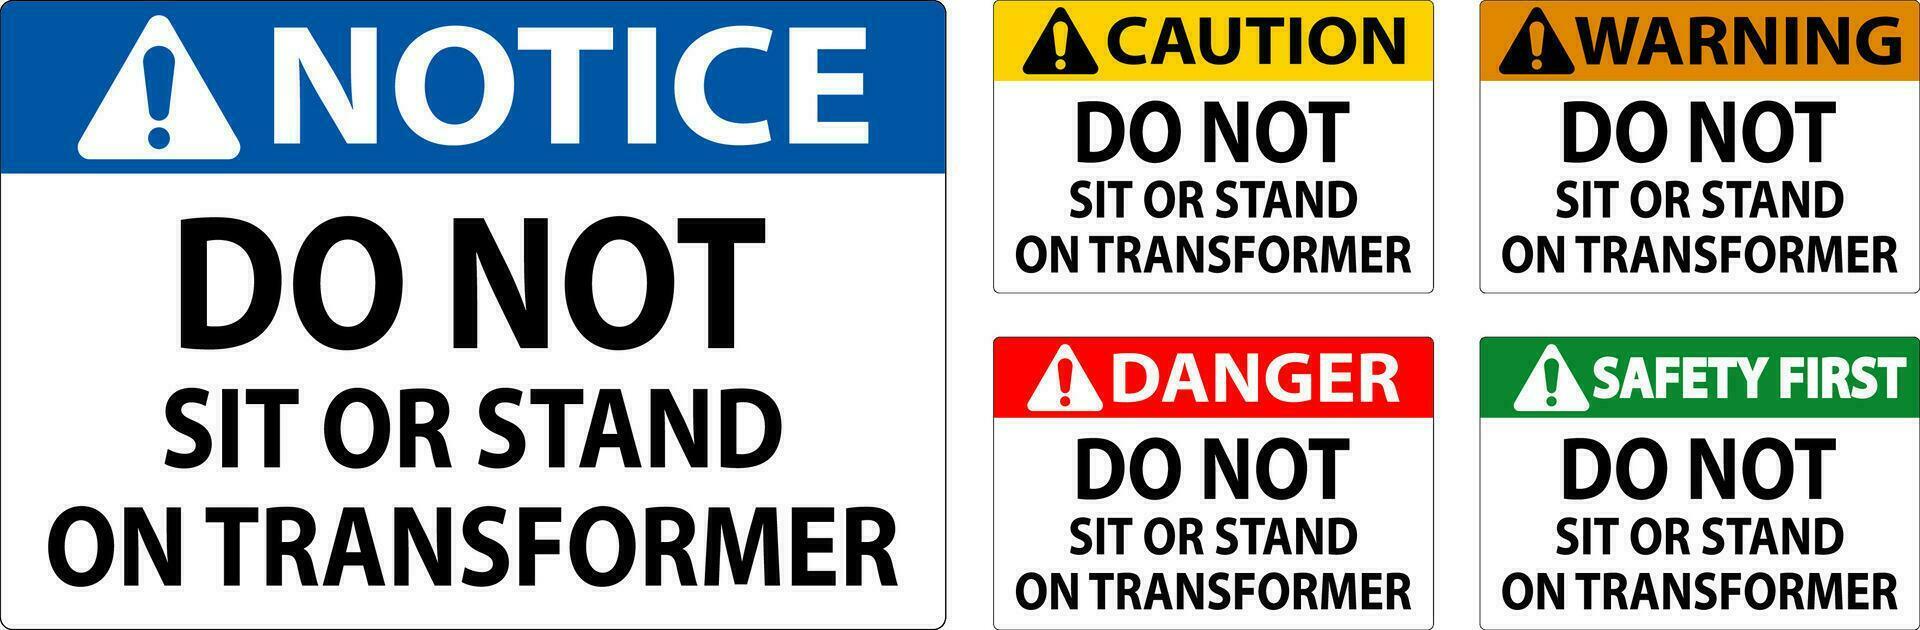 Warning Sign - Do Not Sit Or Stand On Transformer vector